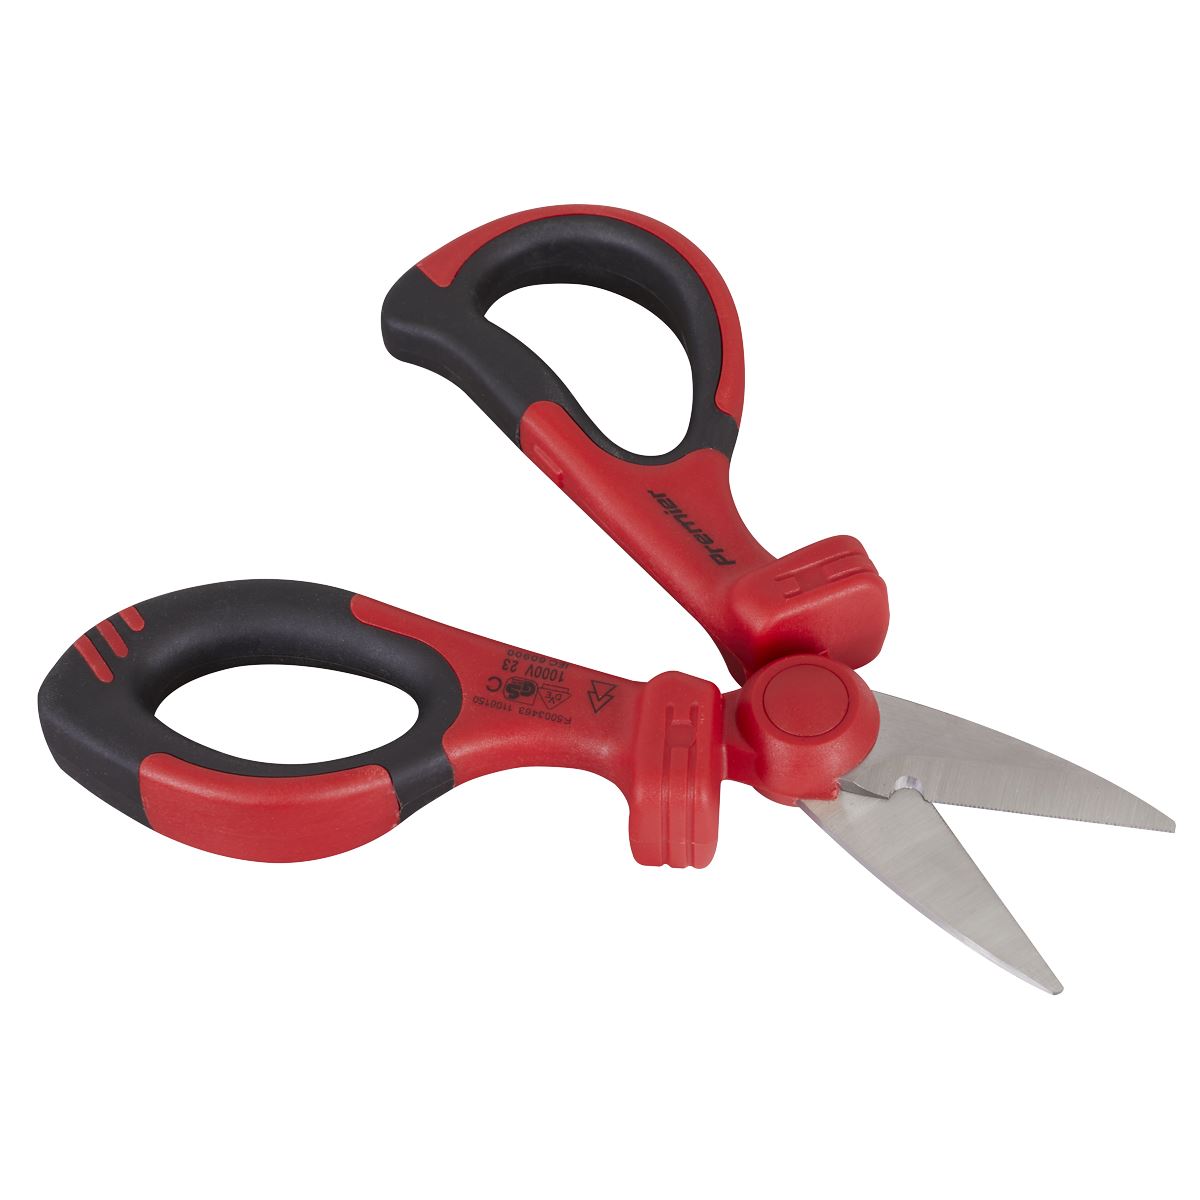 Sealey Premier Insulated Scissors - VDE Approved